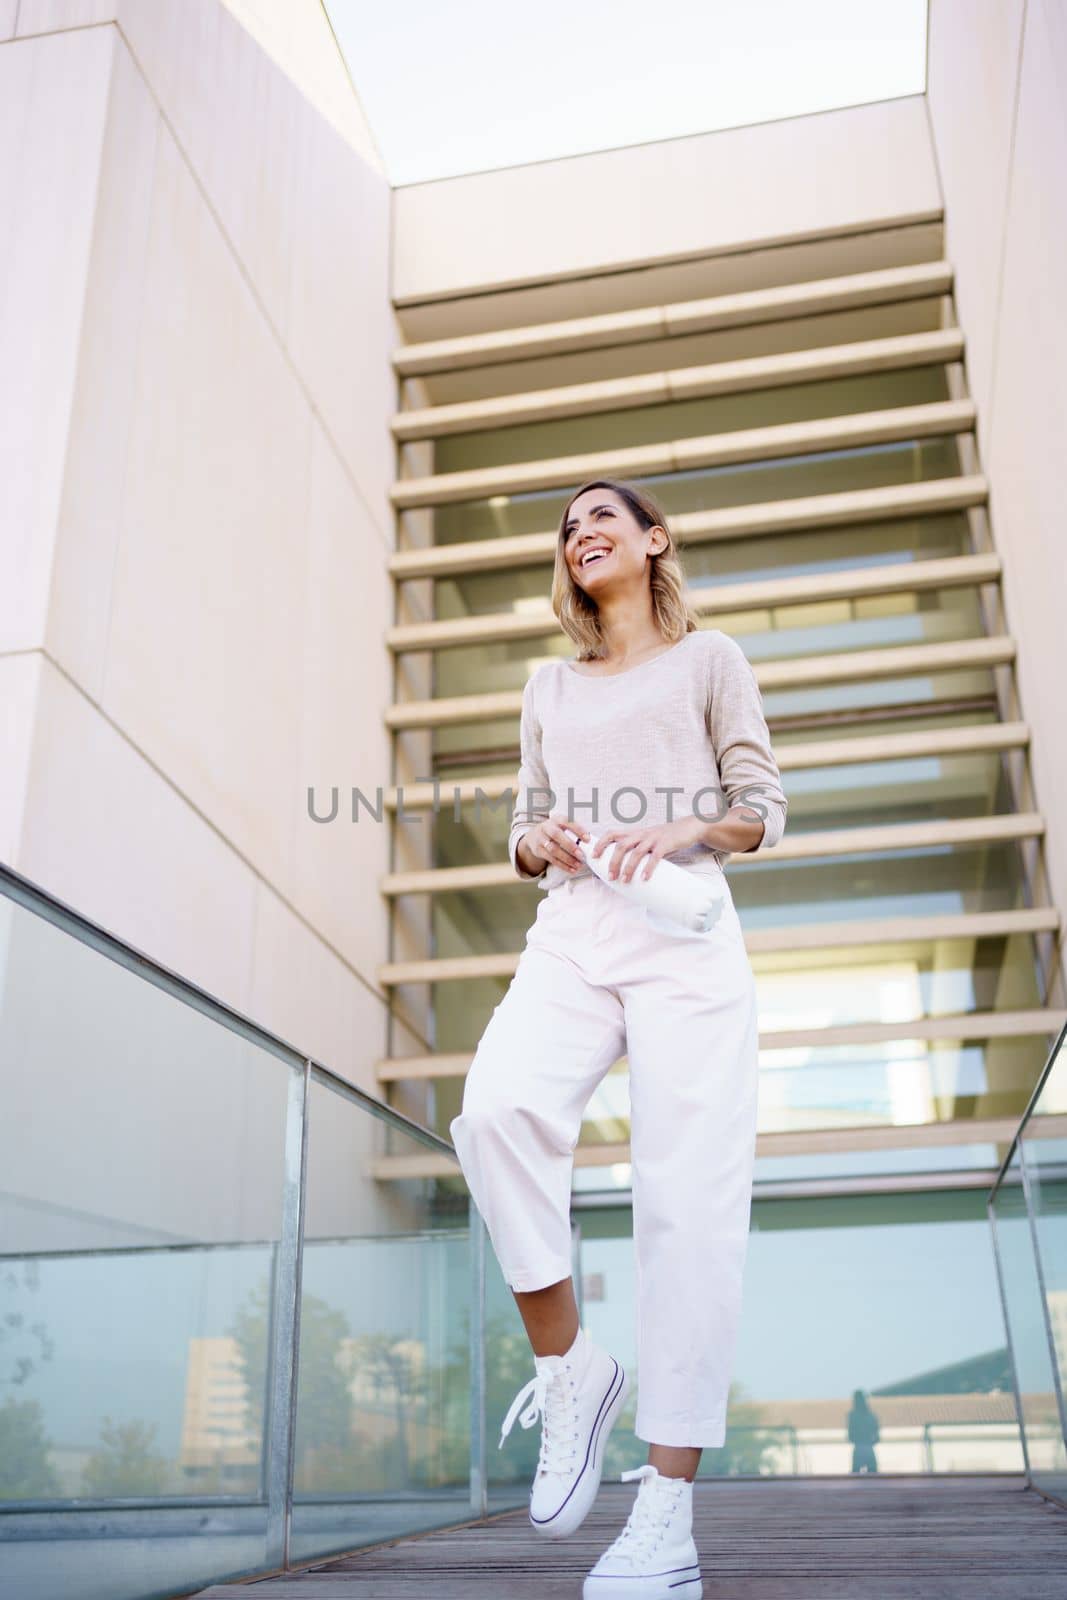 Low angle of cheerful female in stylish outfit, laughing and looking away while standing on path and opening eco friendly bottle of water against modern building on city street